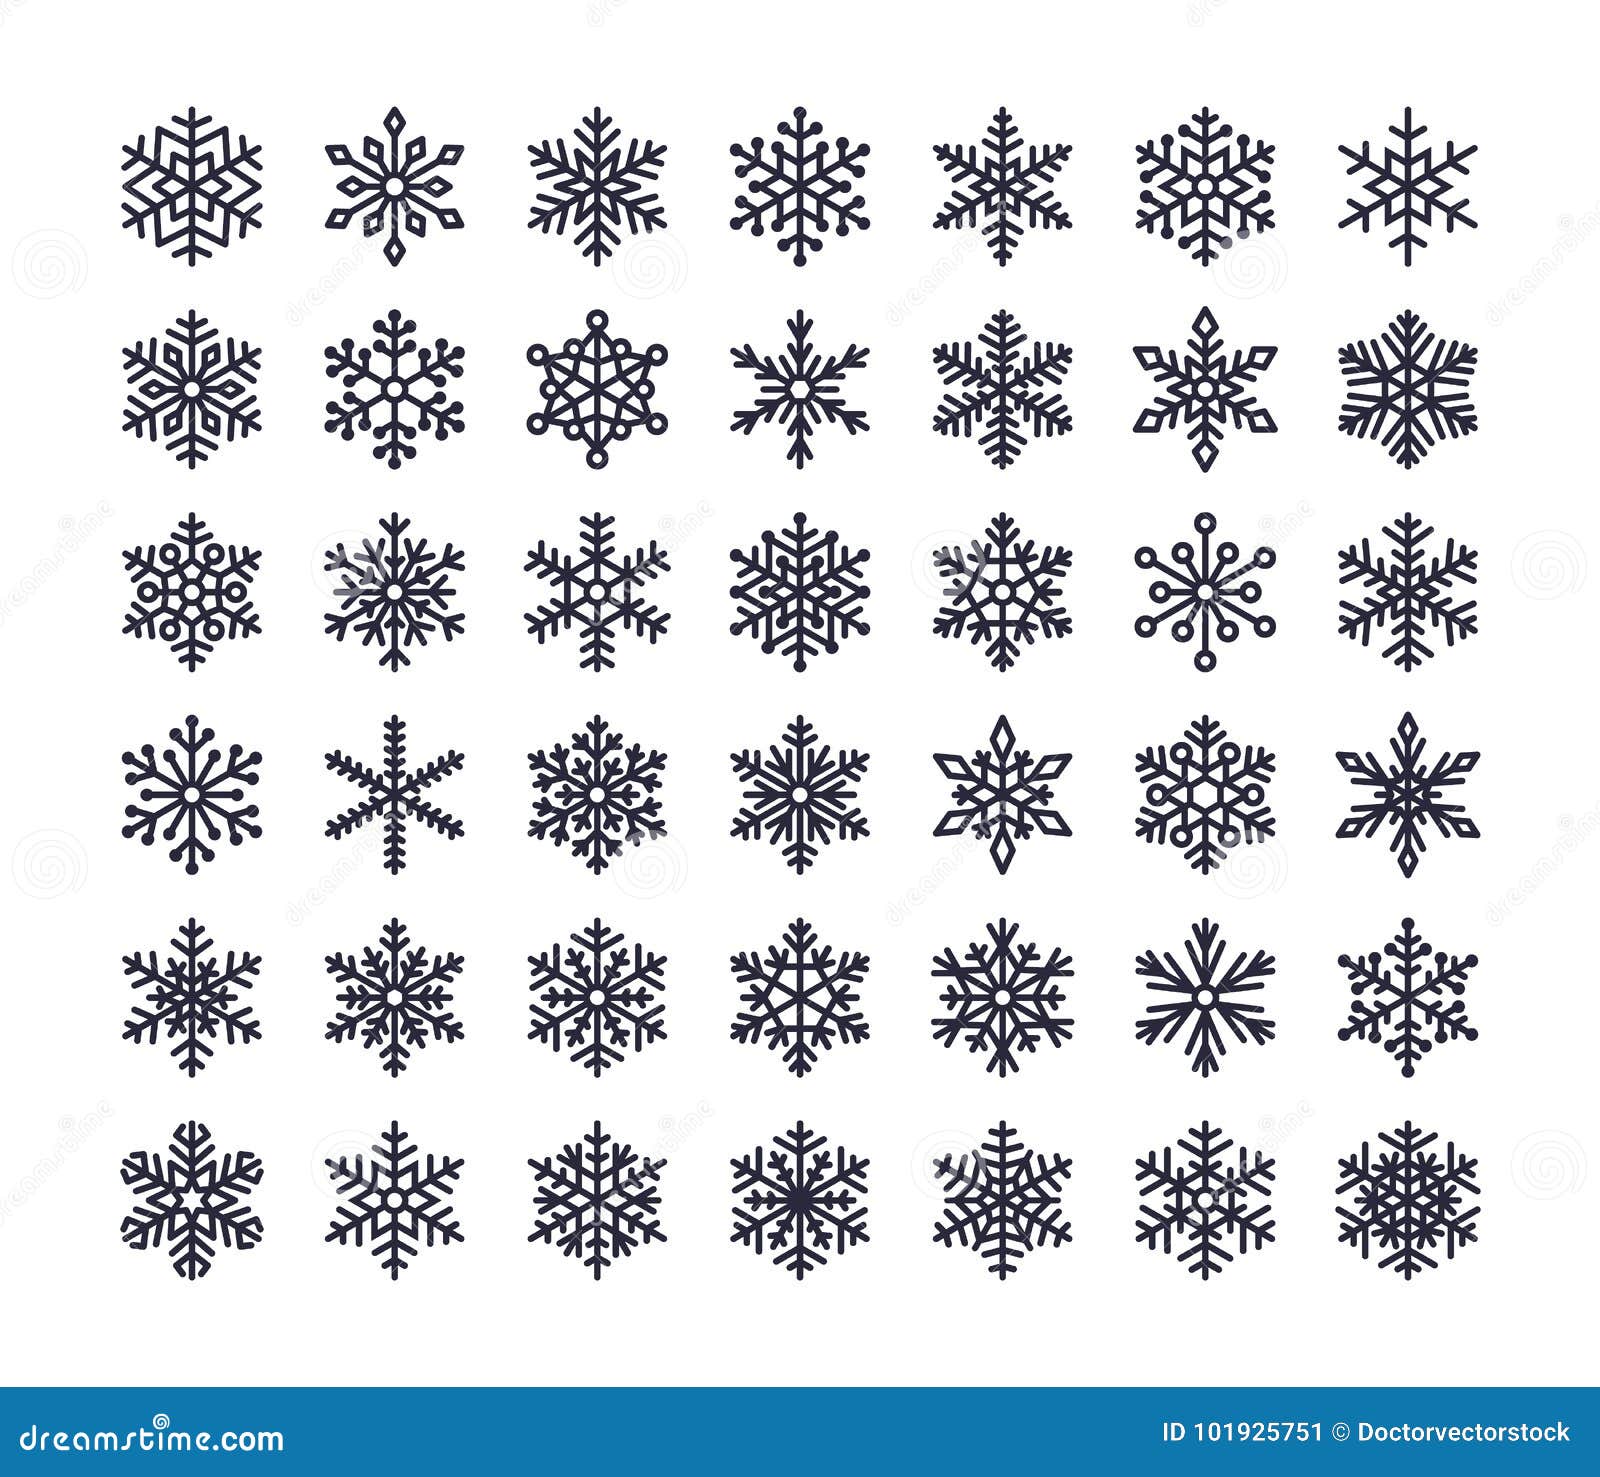 snowflake flat icons set. collection of cute geometric snowflakes, stylized snowfall.   for christmas or